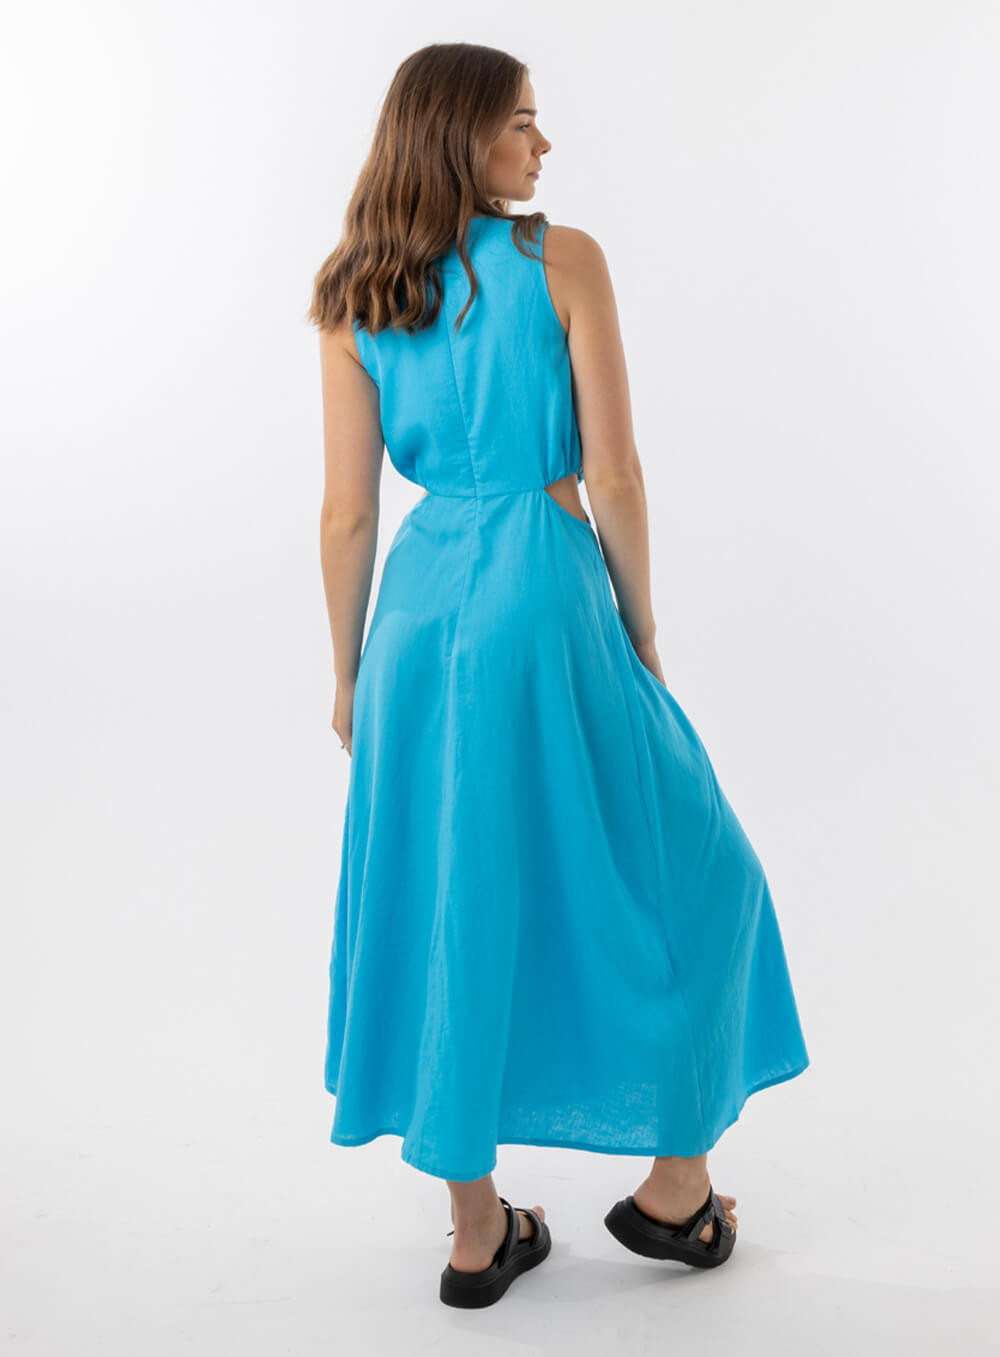 Bella Dress in Aqua features a gathered neckline, sleeveless, small cut outs at top and side of hips, with a a small ring above belly button and midi in length with a flowing skirt.